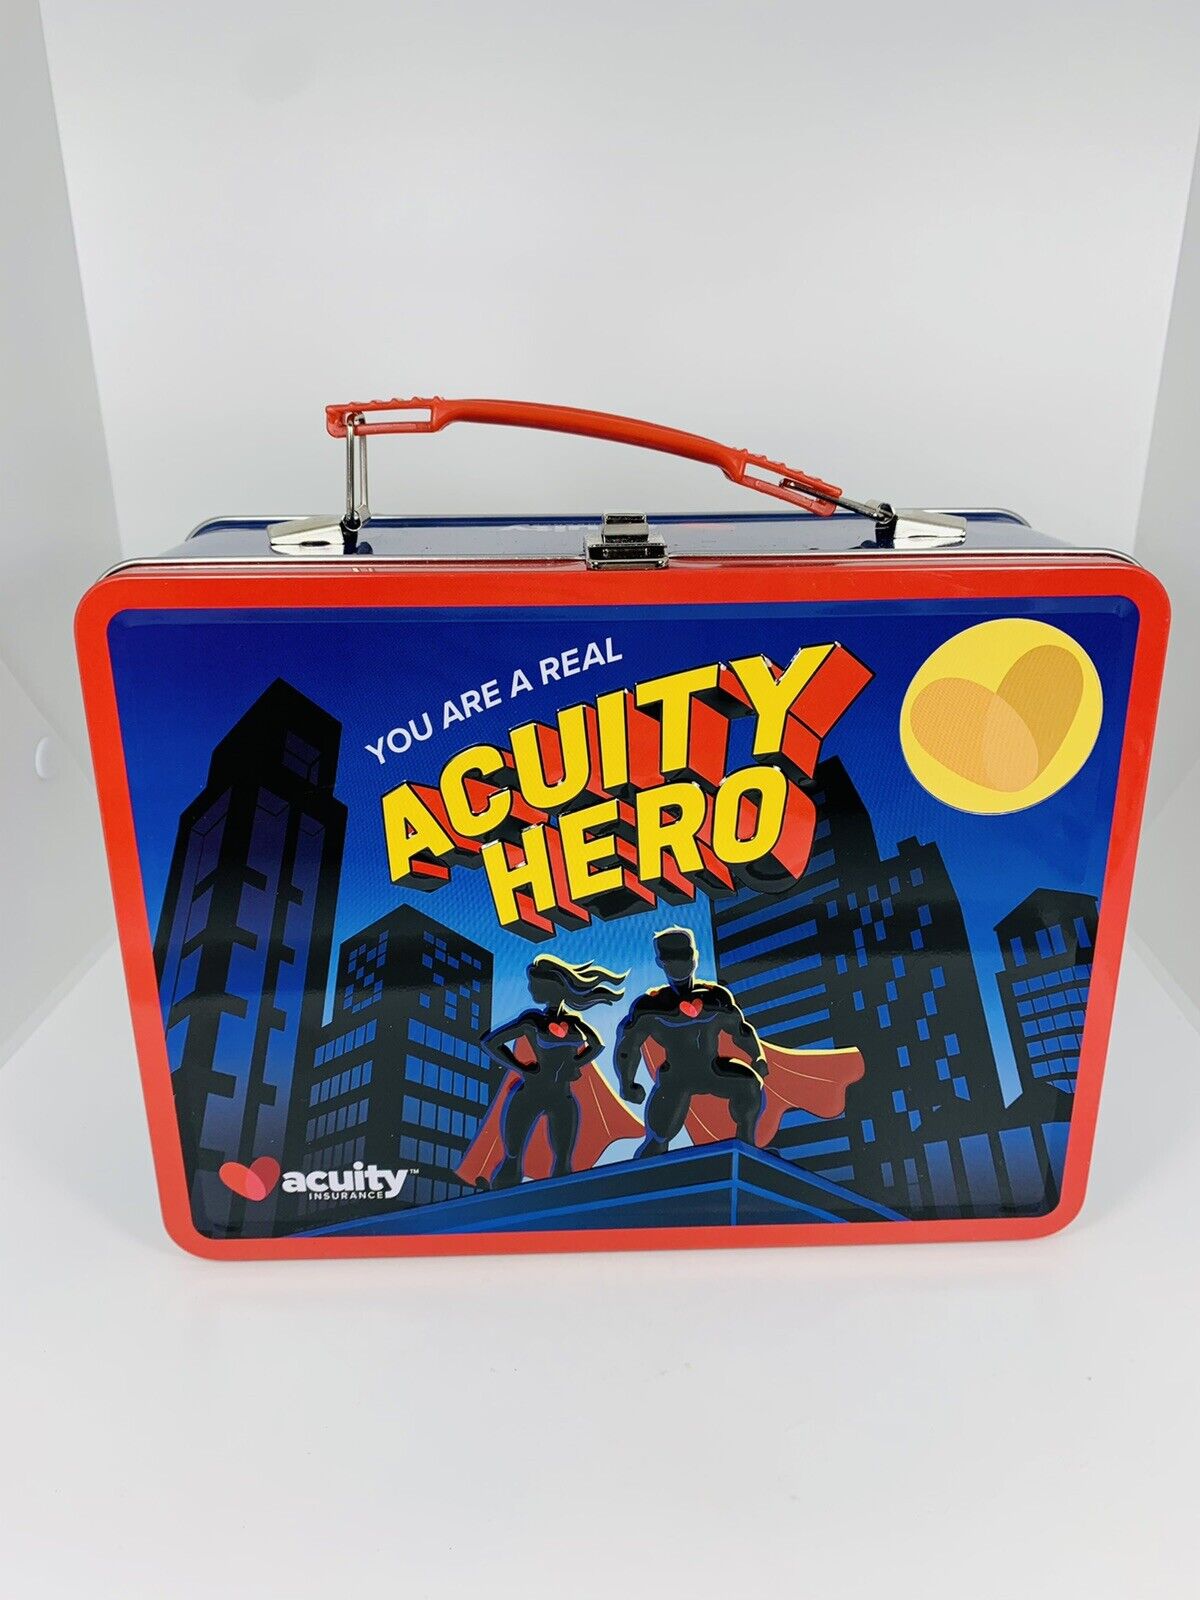 Vtg Acuity Insurance (You Are A Real Acuity Hero) Metal Lunch Box, with Thermos